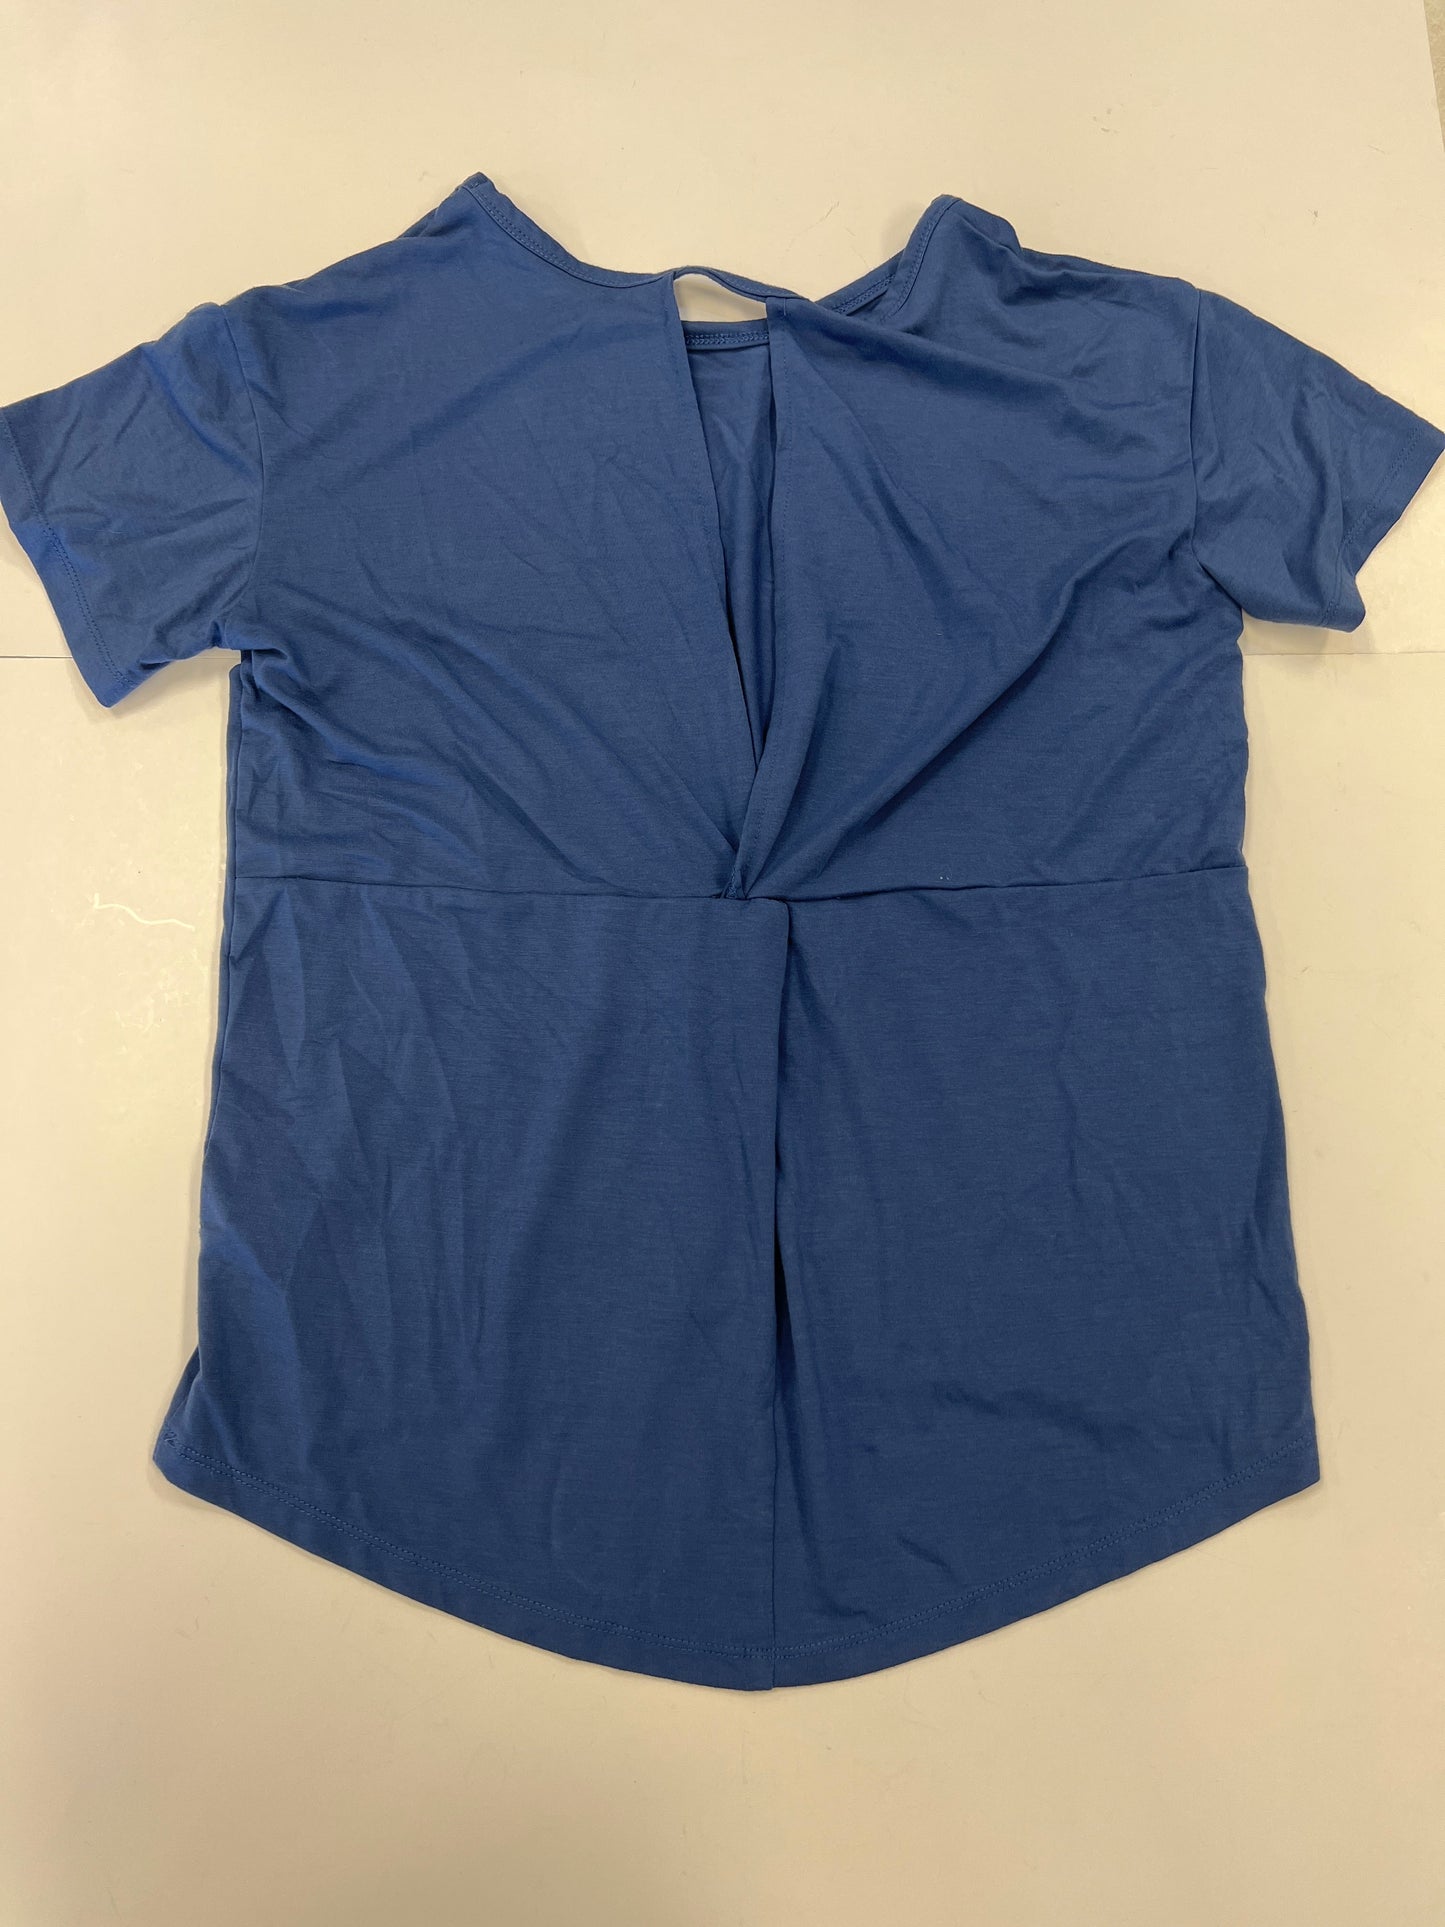 Blue Top Short Sleeve Basic Clothes Mentor, Size S